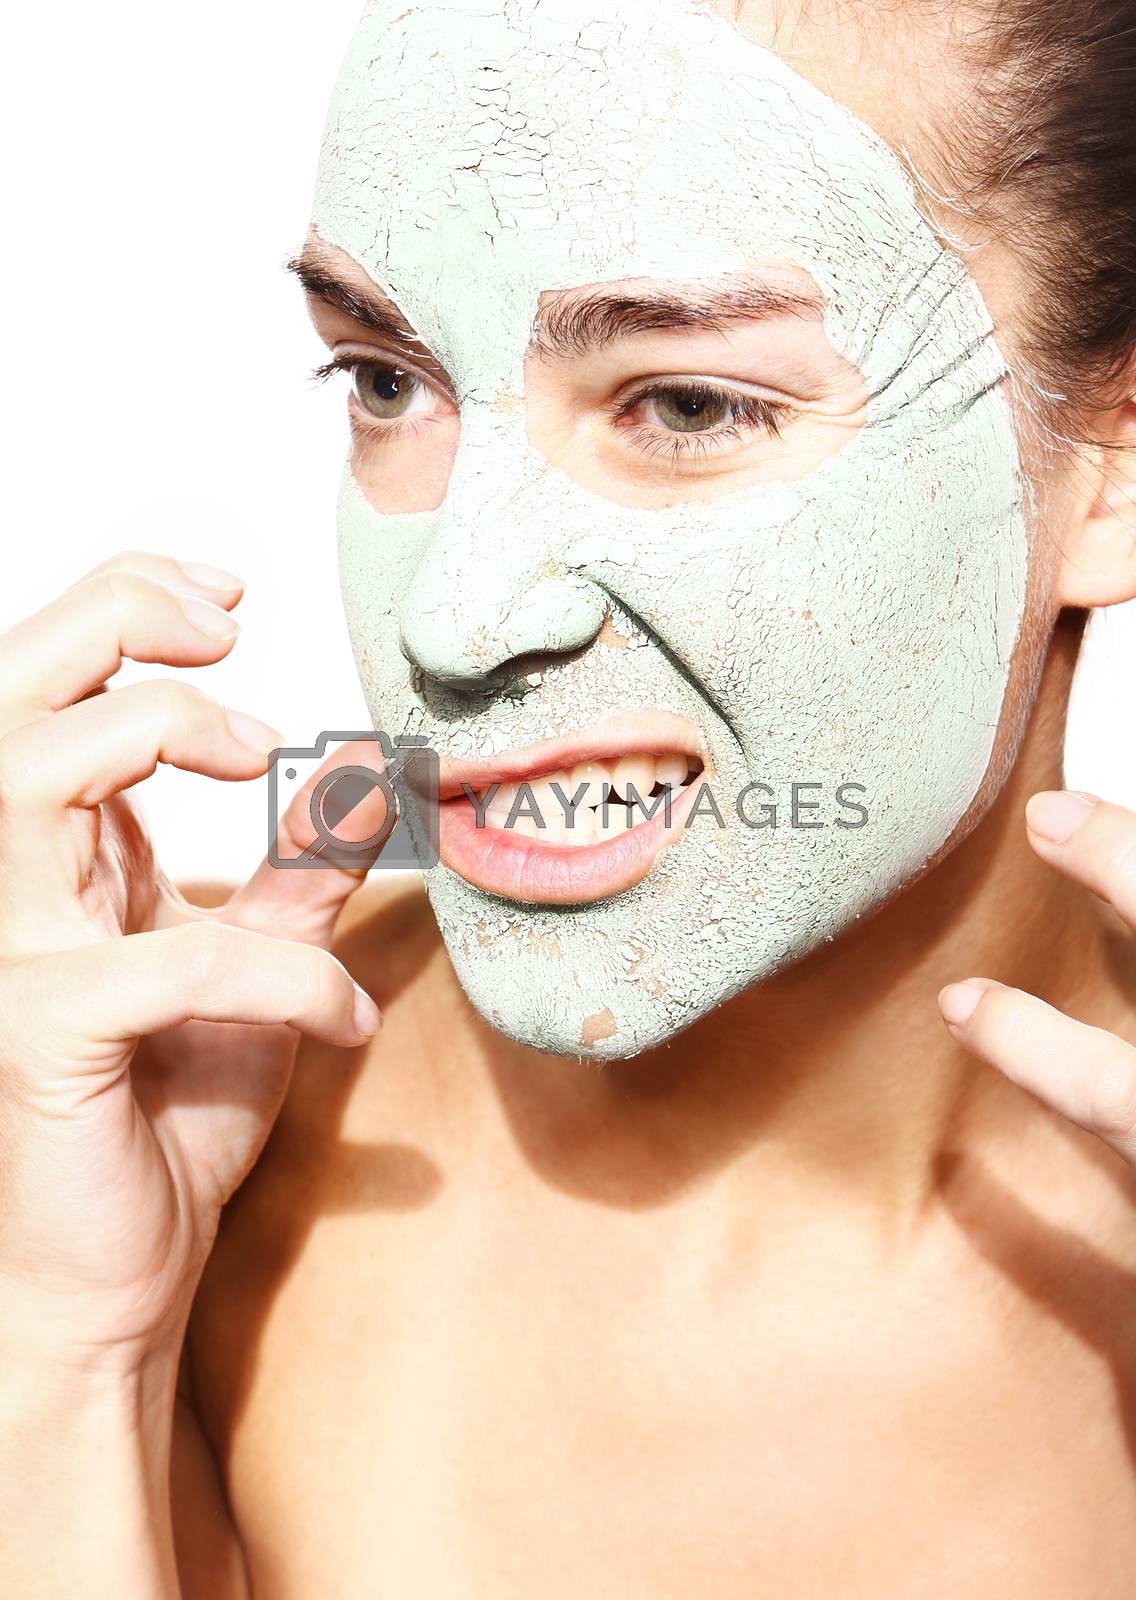 Royalty free image of impatient woman in the mask with green clay by robert_przybysz